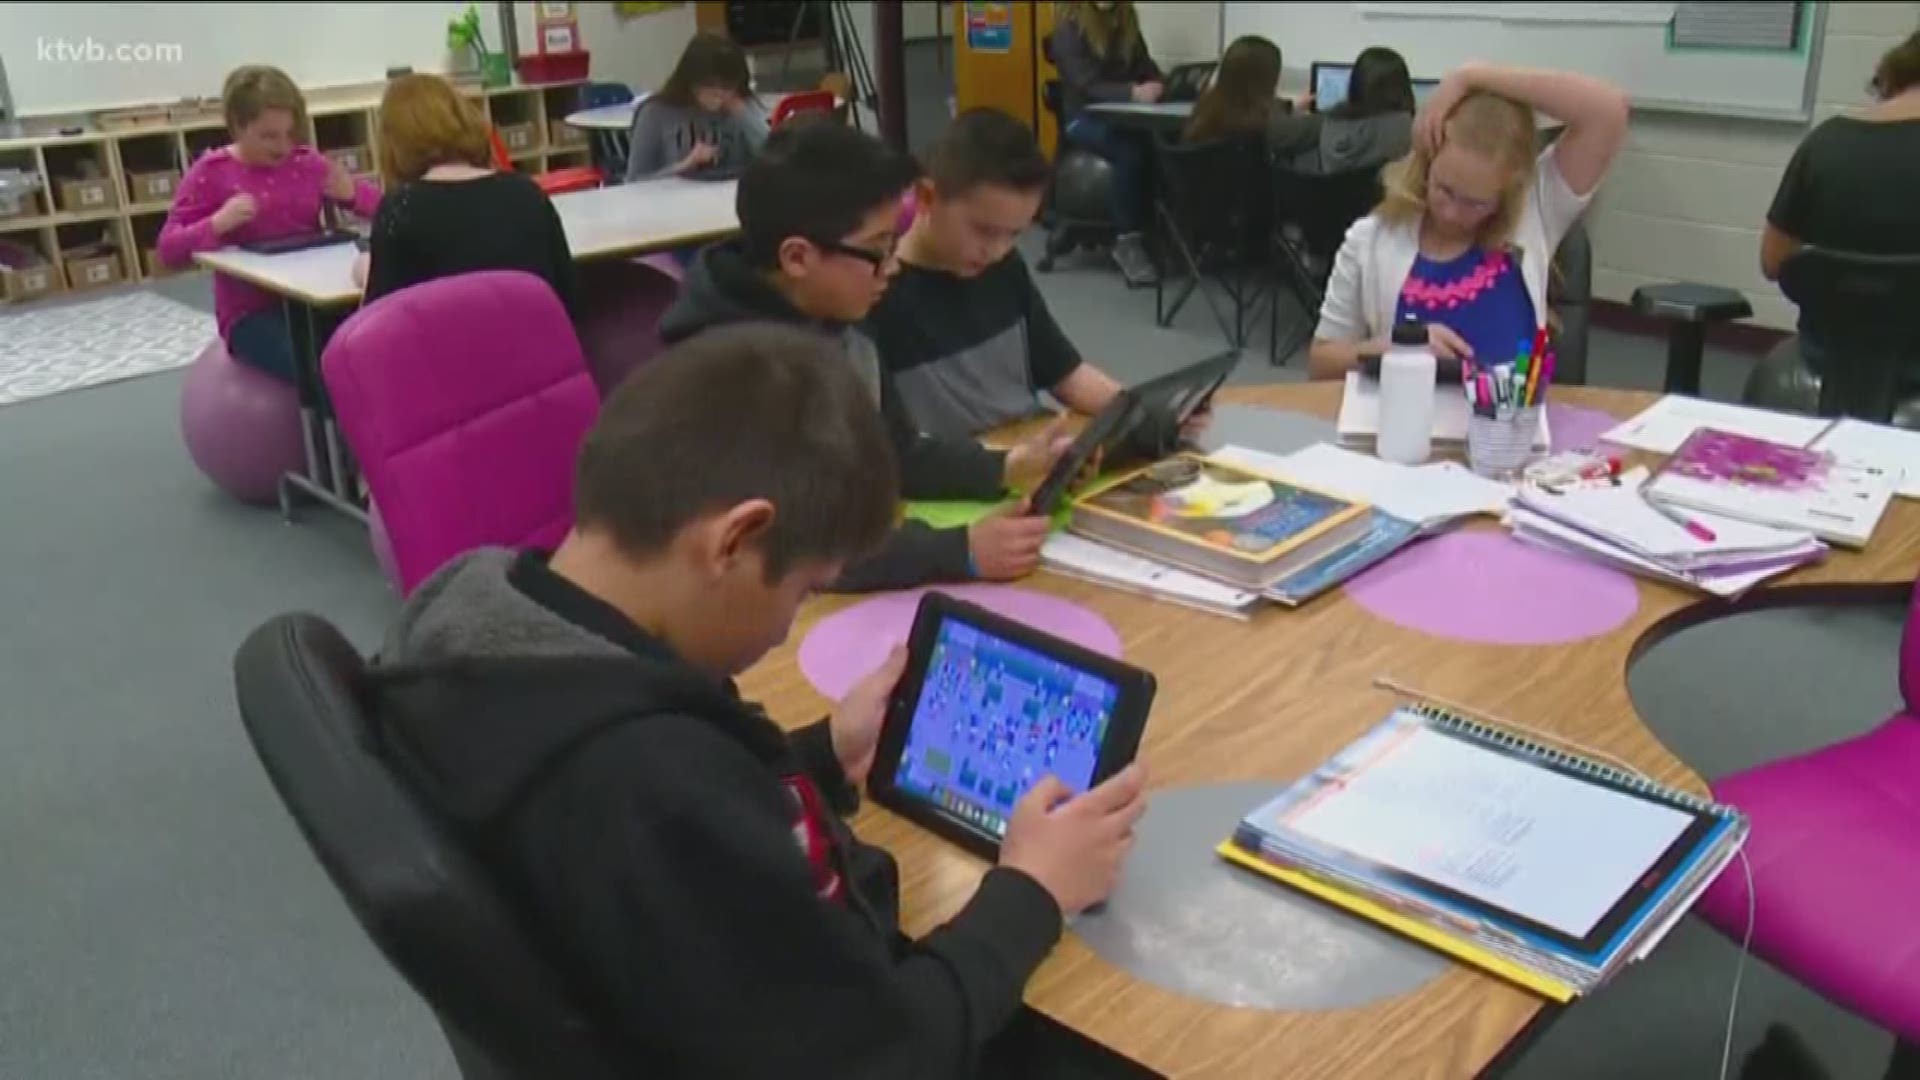 Teachers across the state are having to rely on technology to teach kids outside the classroom.